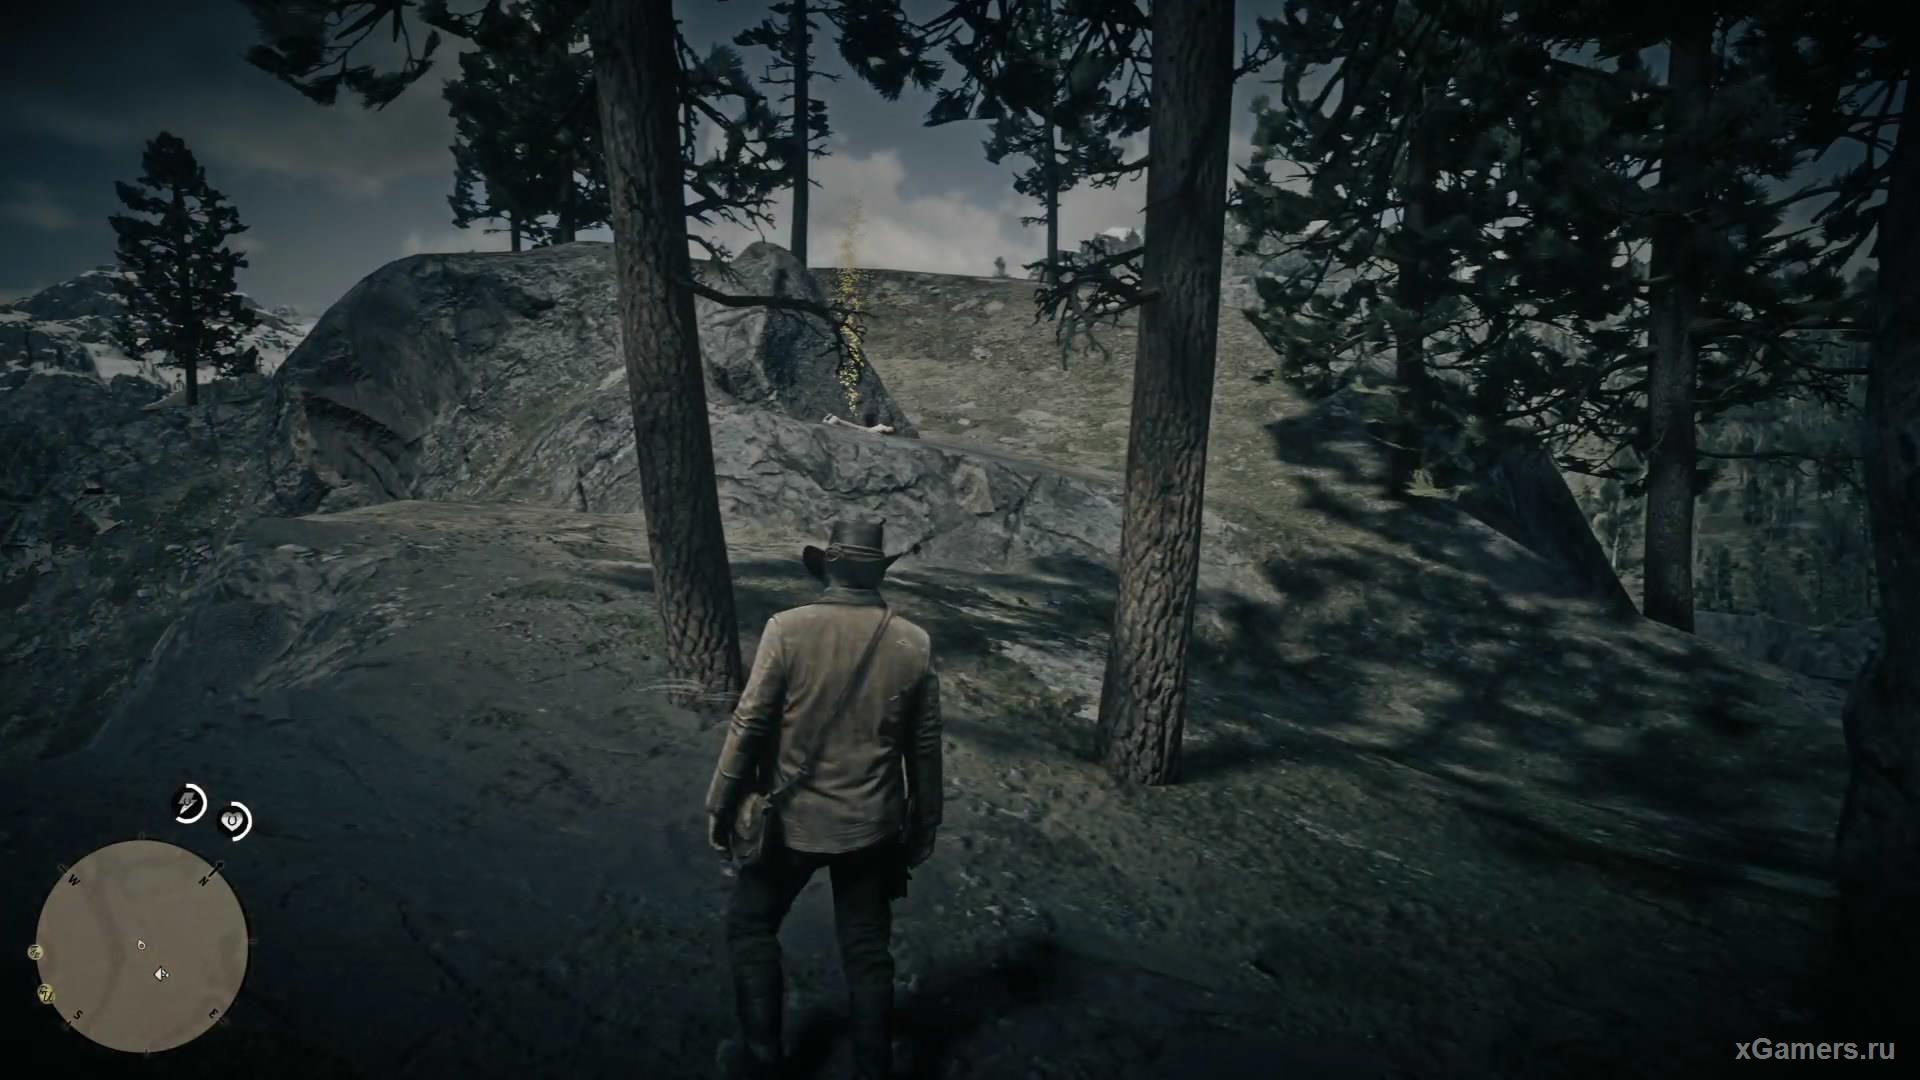 13 the bone is located west of Annesburg, the fragment lies on the flat top of a small hill.